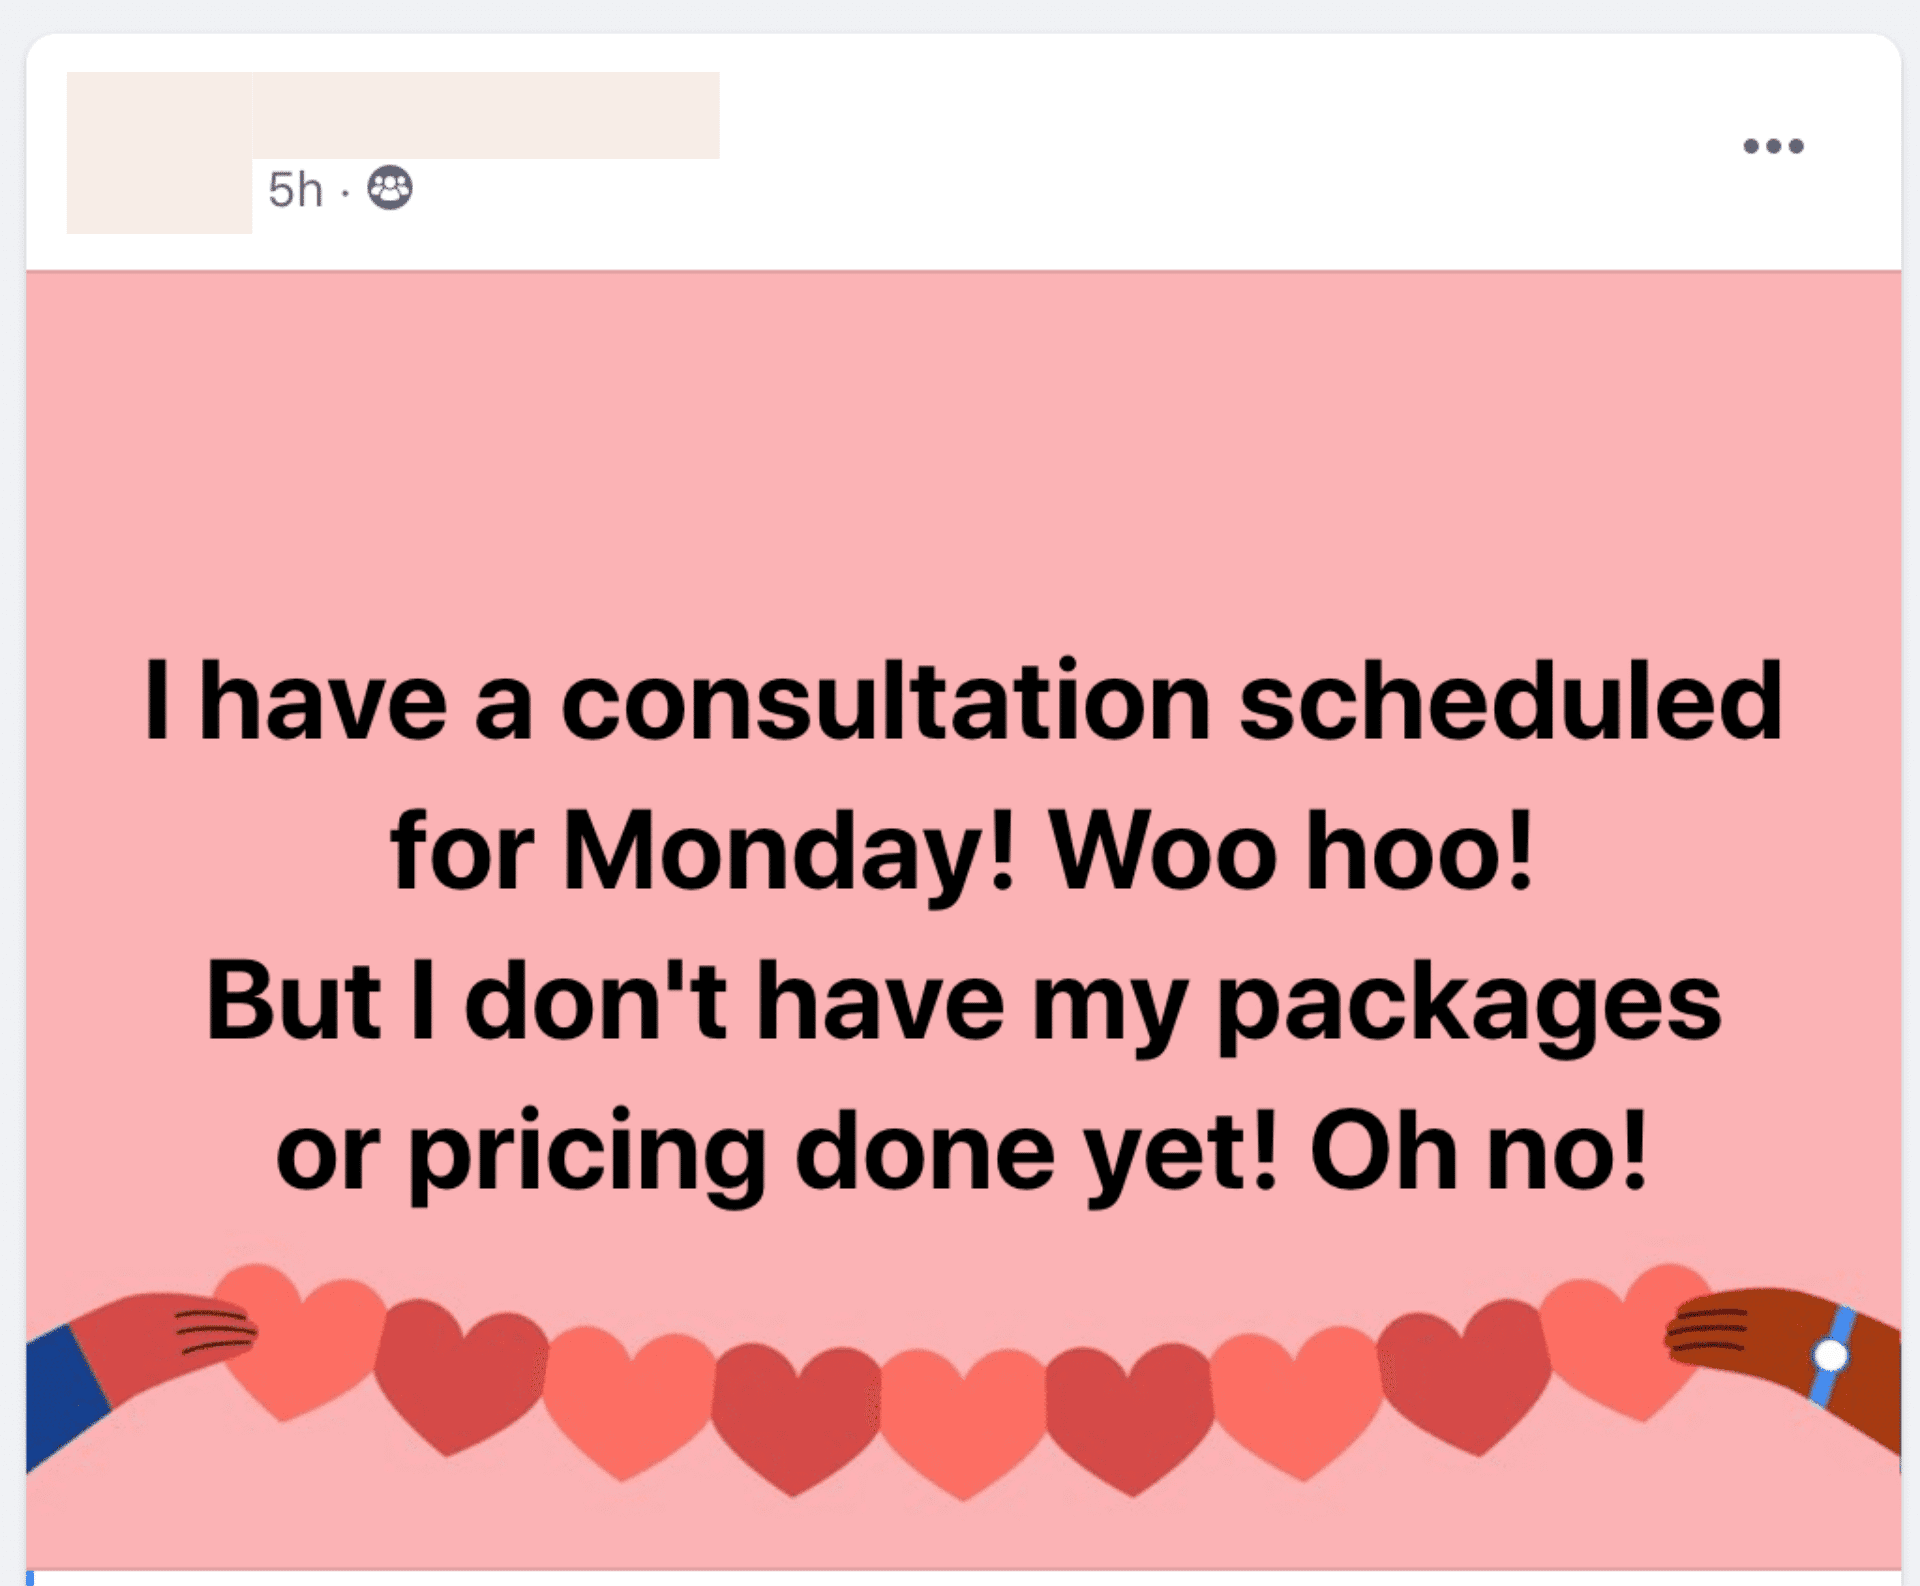 In the image, the speaker is excited about having a consultation scheduled for Monday, but is worried about not having their packages or pricing done yet. Full Text: .. 5h . 8 I have a consultation scheduled for Monday! Woo hoo! But I don't have my packages or pricing done yet! Oh no! -